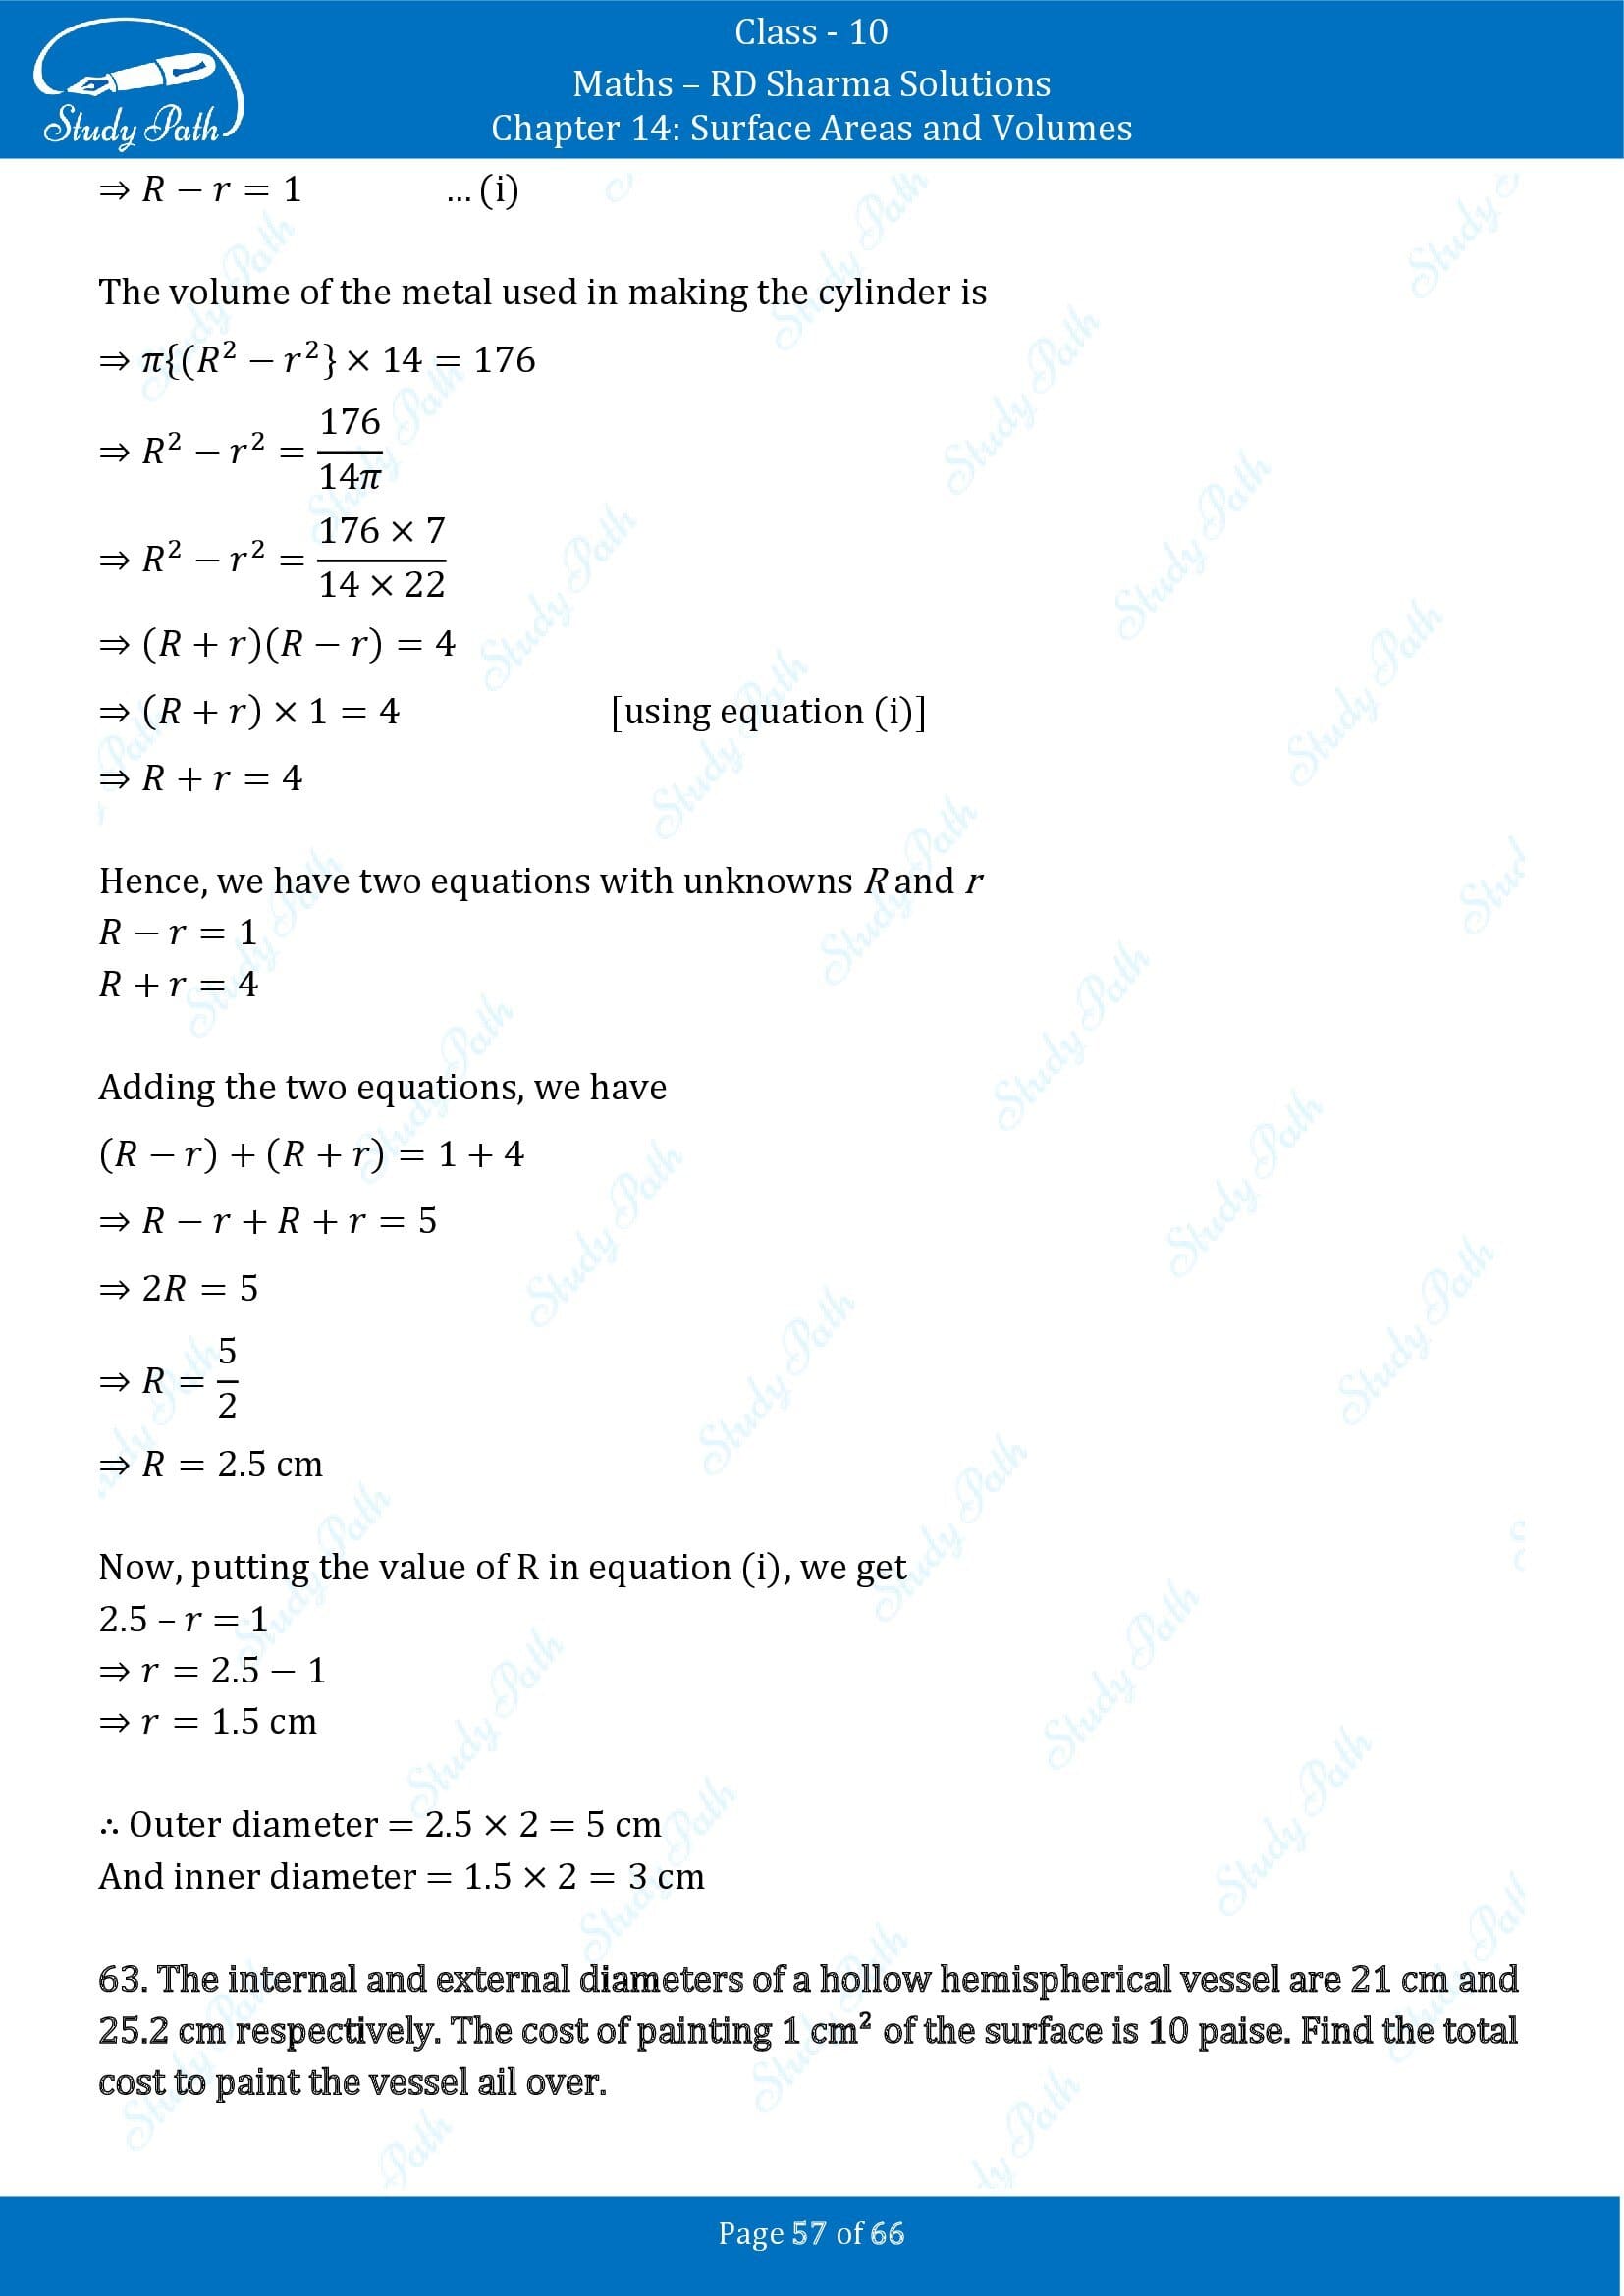 RD Sharma Solutions Class 10 Chapter 14 Surface Areas and Volumes Exercise 14.1 00057